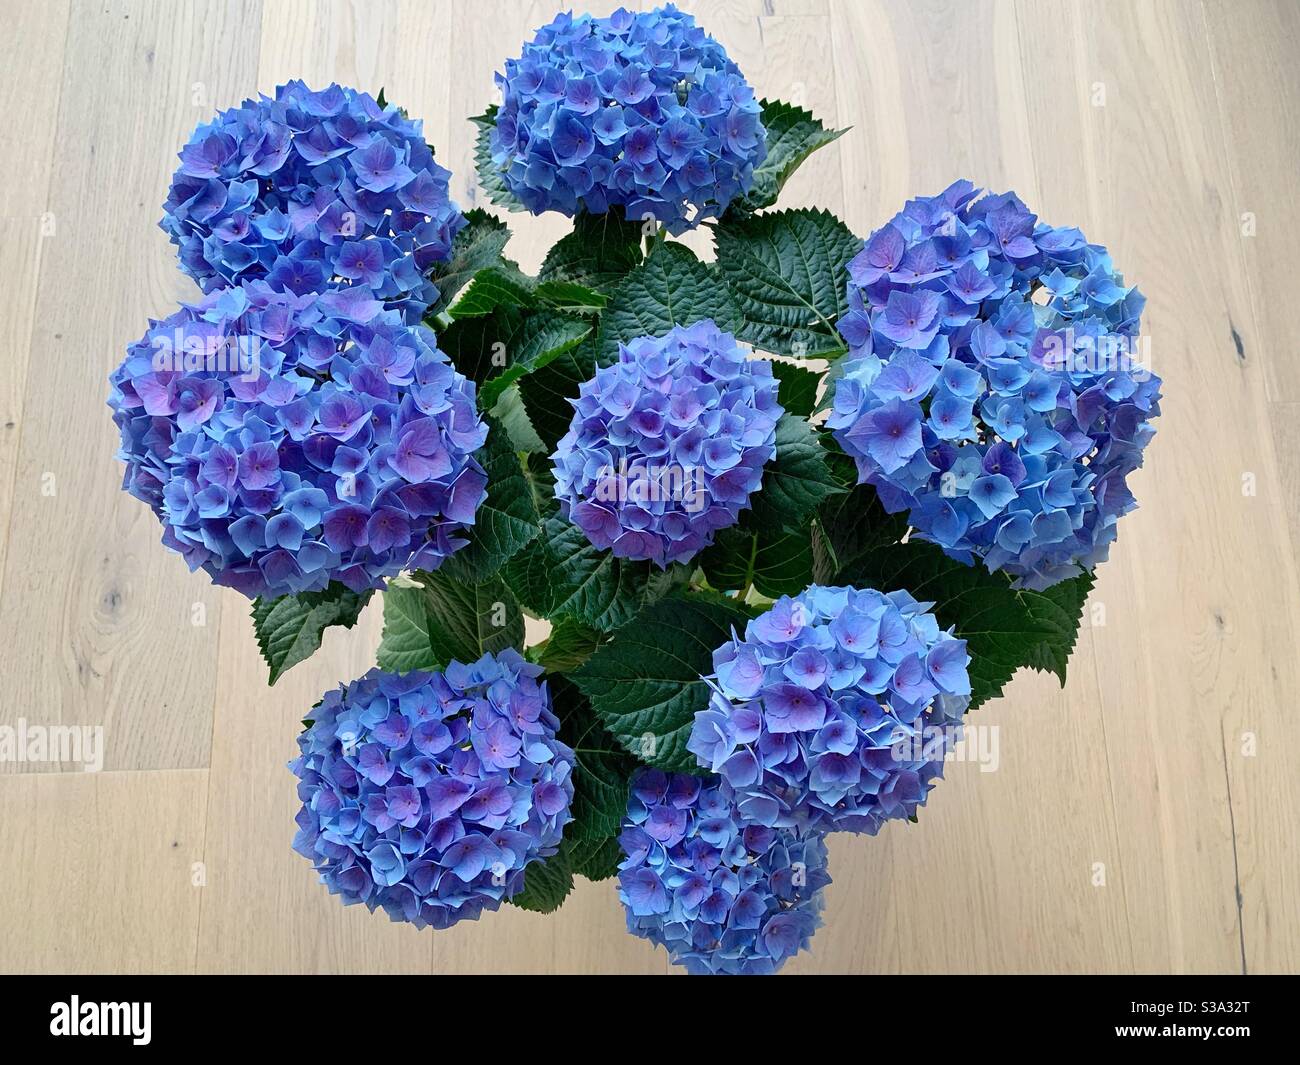 Blue purple hydrangea flowers with green leaves Stock Photo